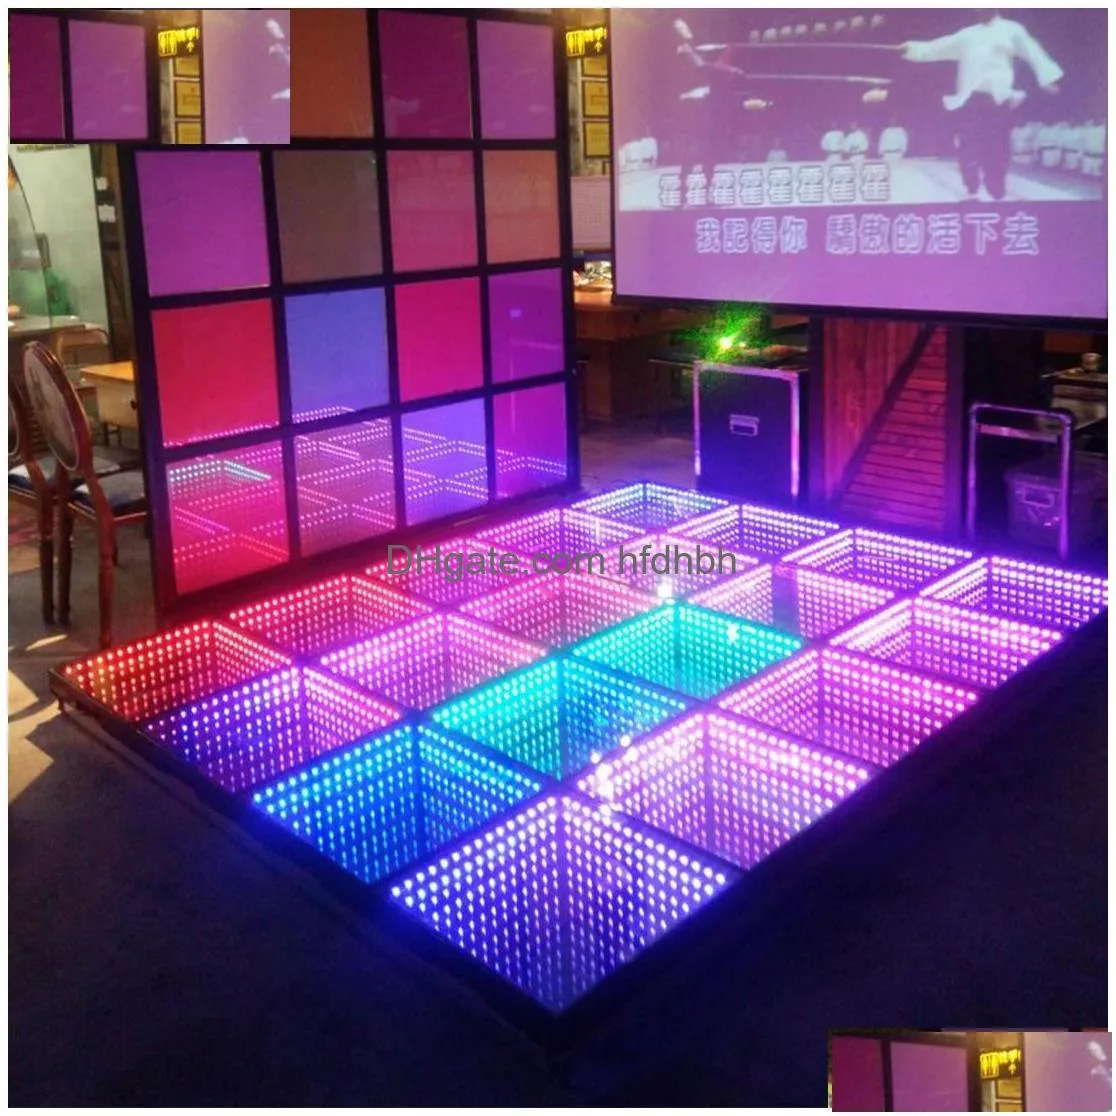 infinity mirror 3d led dance floor stage lighting effect wireless remote light tiles rgb 3in1 dmx flooring panel for events nightclubs party